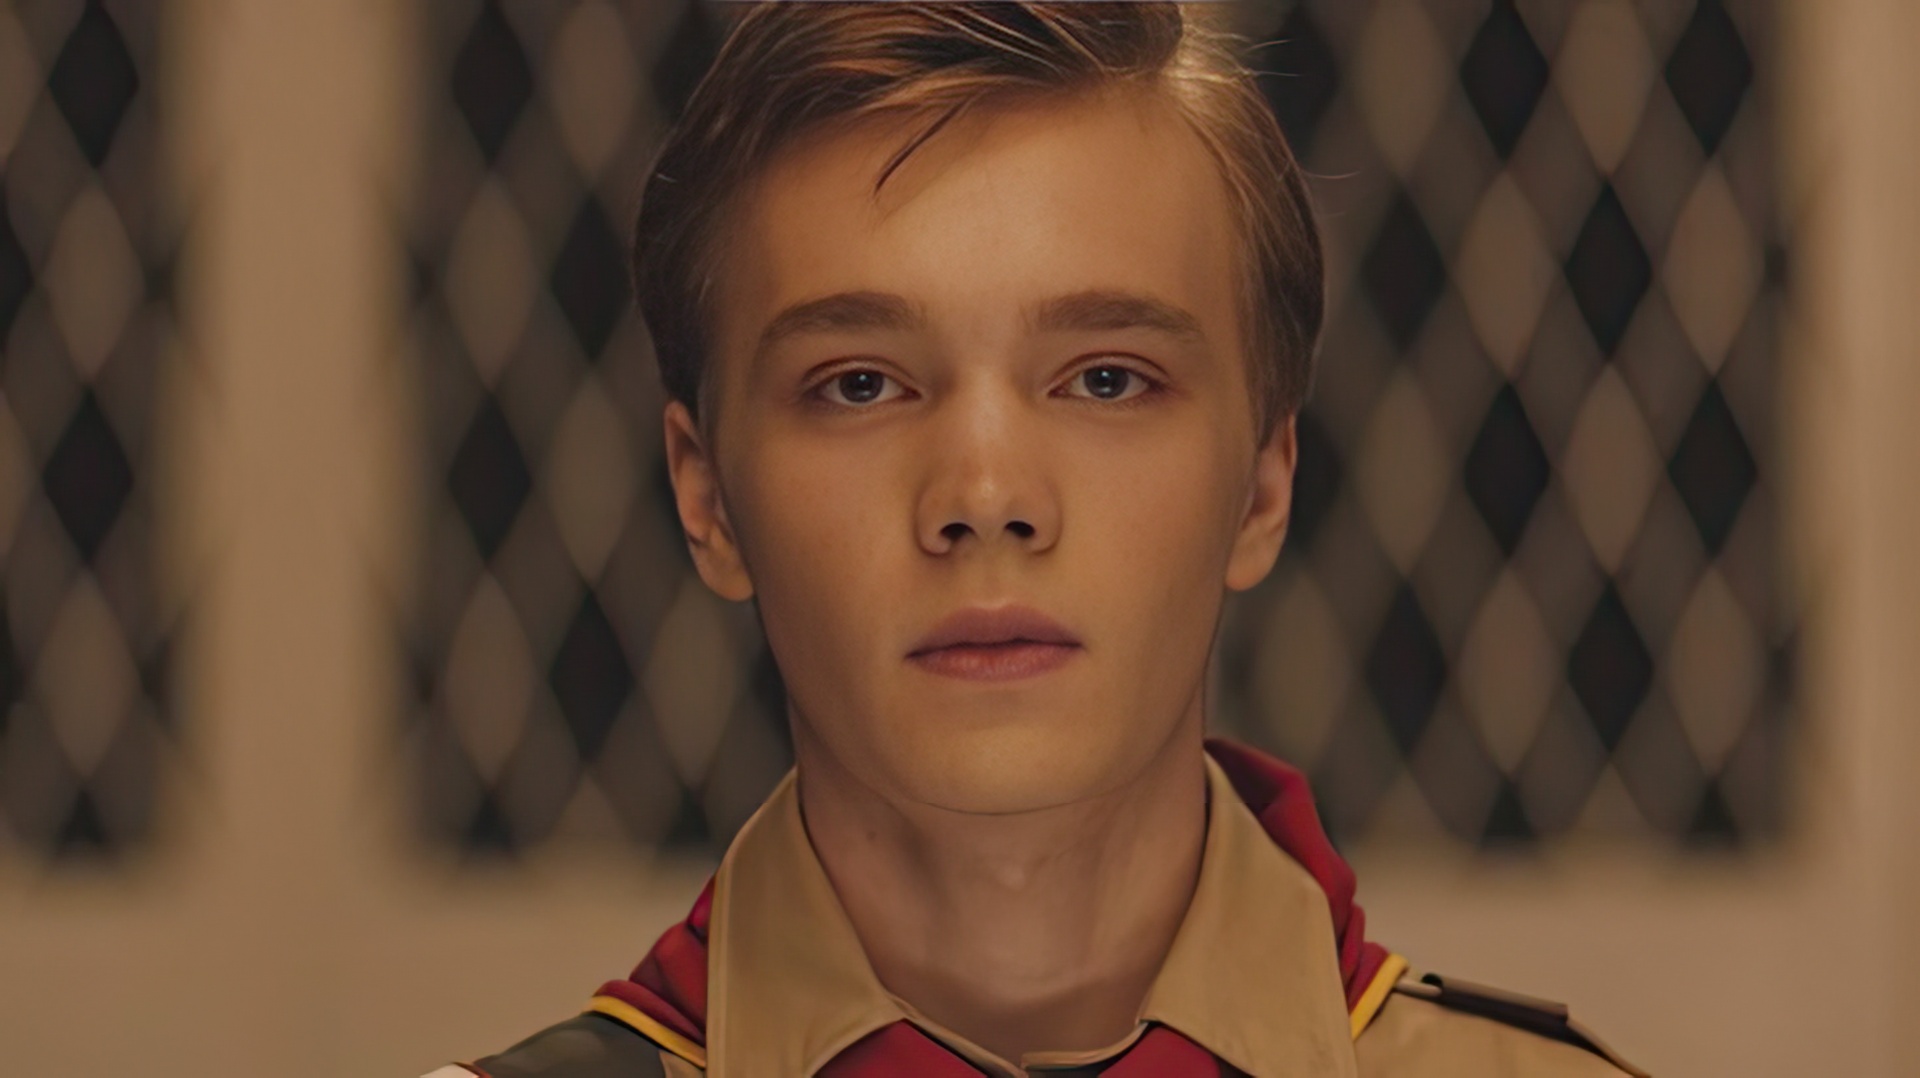 Charlie Plummer in the movie 'The Clovehitch Killer'